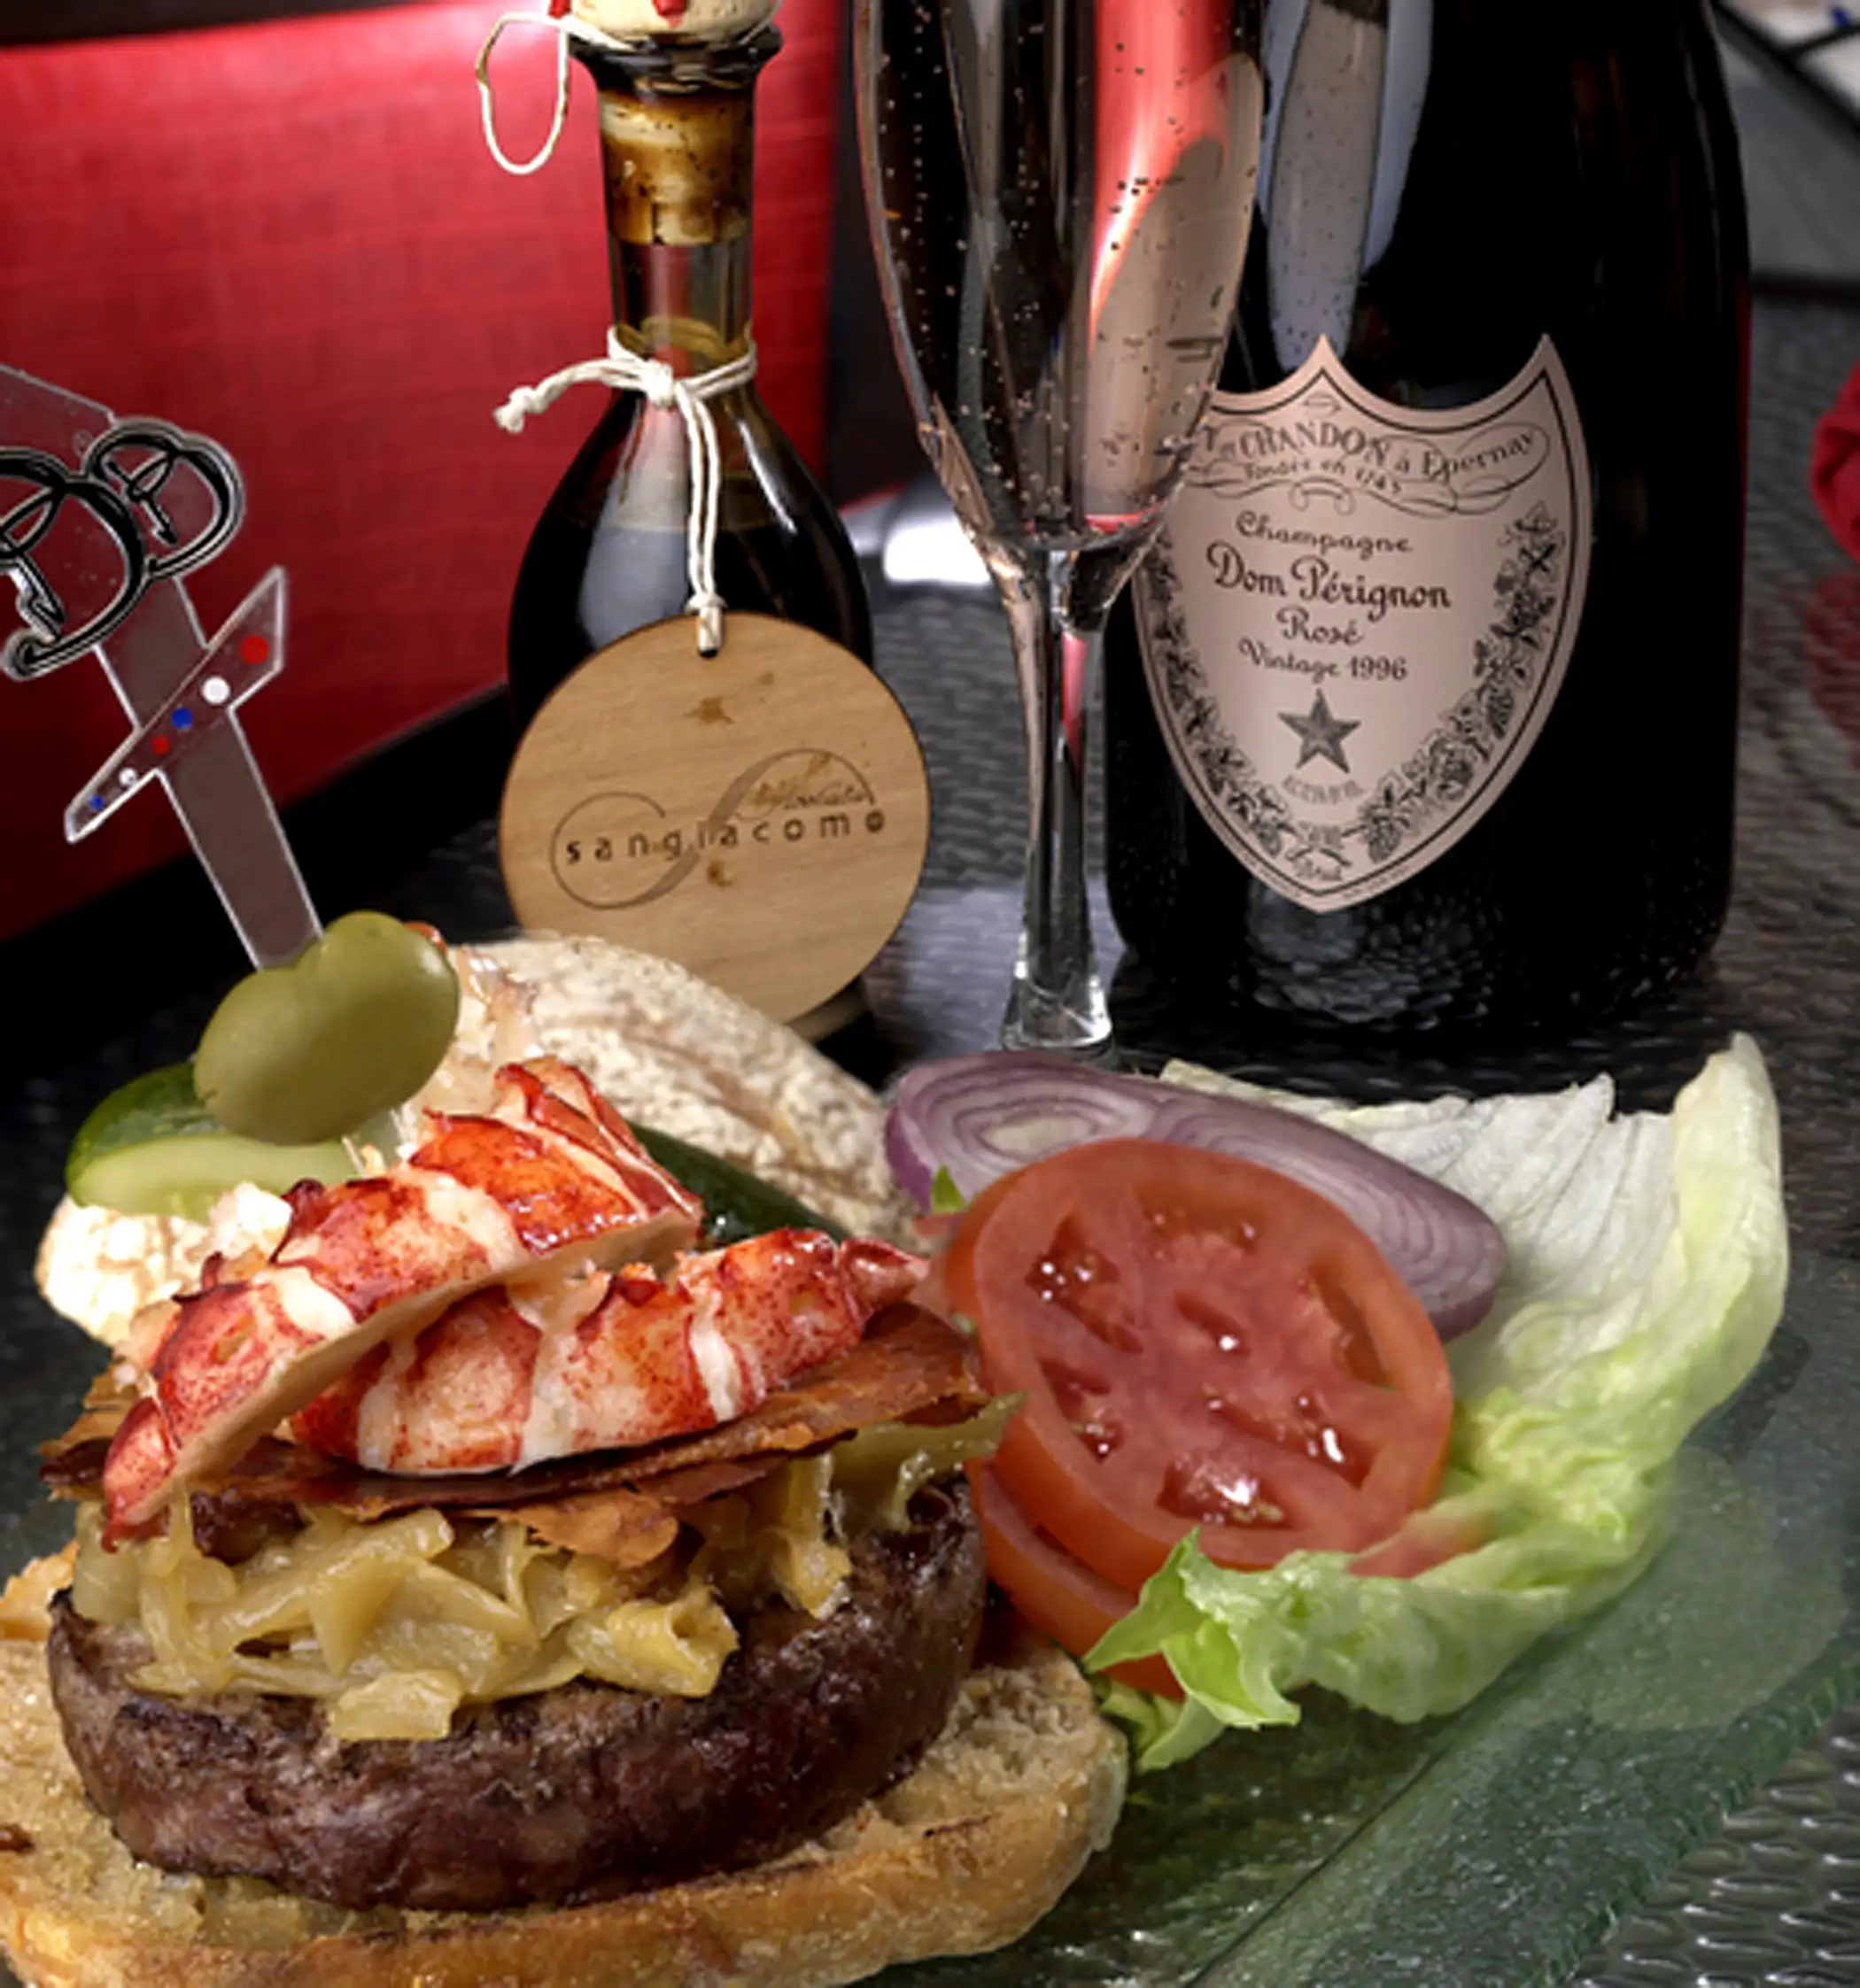 Brasserie in Paris Las Vegas, Nevada. . Consisting of Kobe Beef and fresh Maine Lobster, caramelized onions, imported brie cheese, prosciutto, 100 year aged balsamic vinegar - served with a bottle of Rose Dom Perignon champagne.